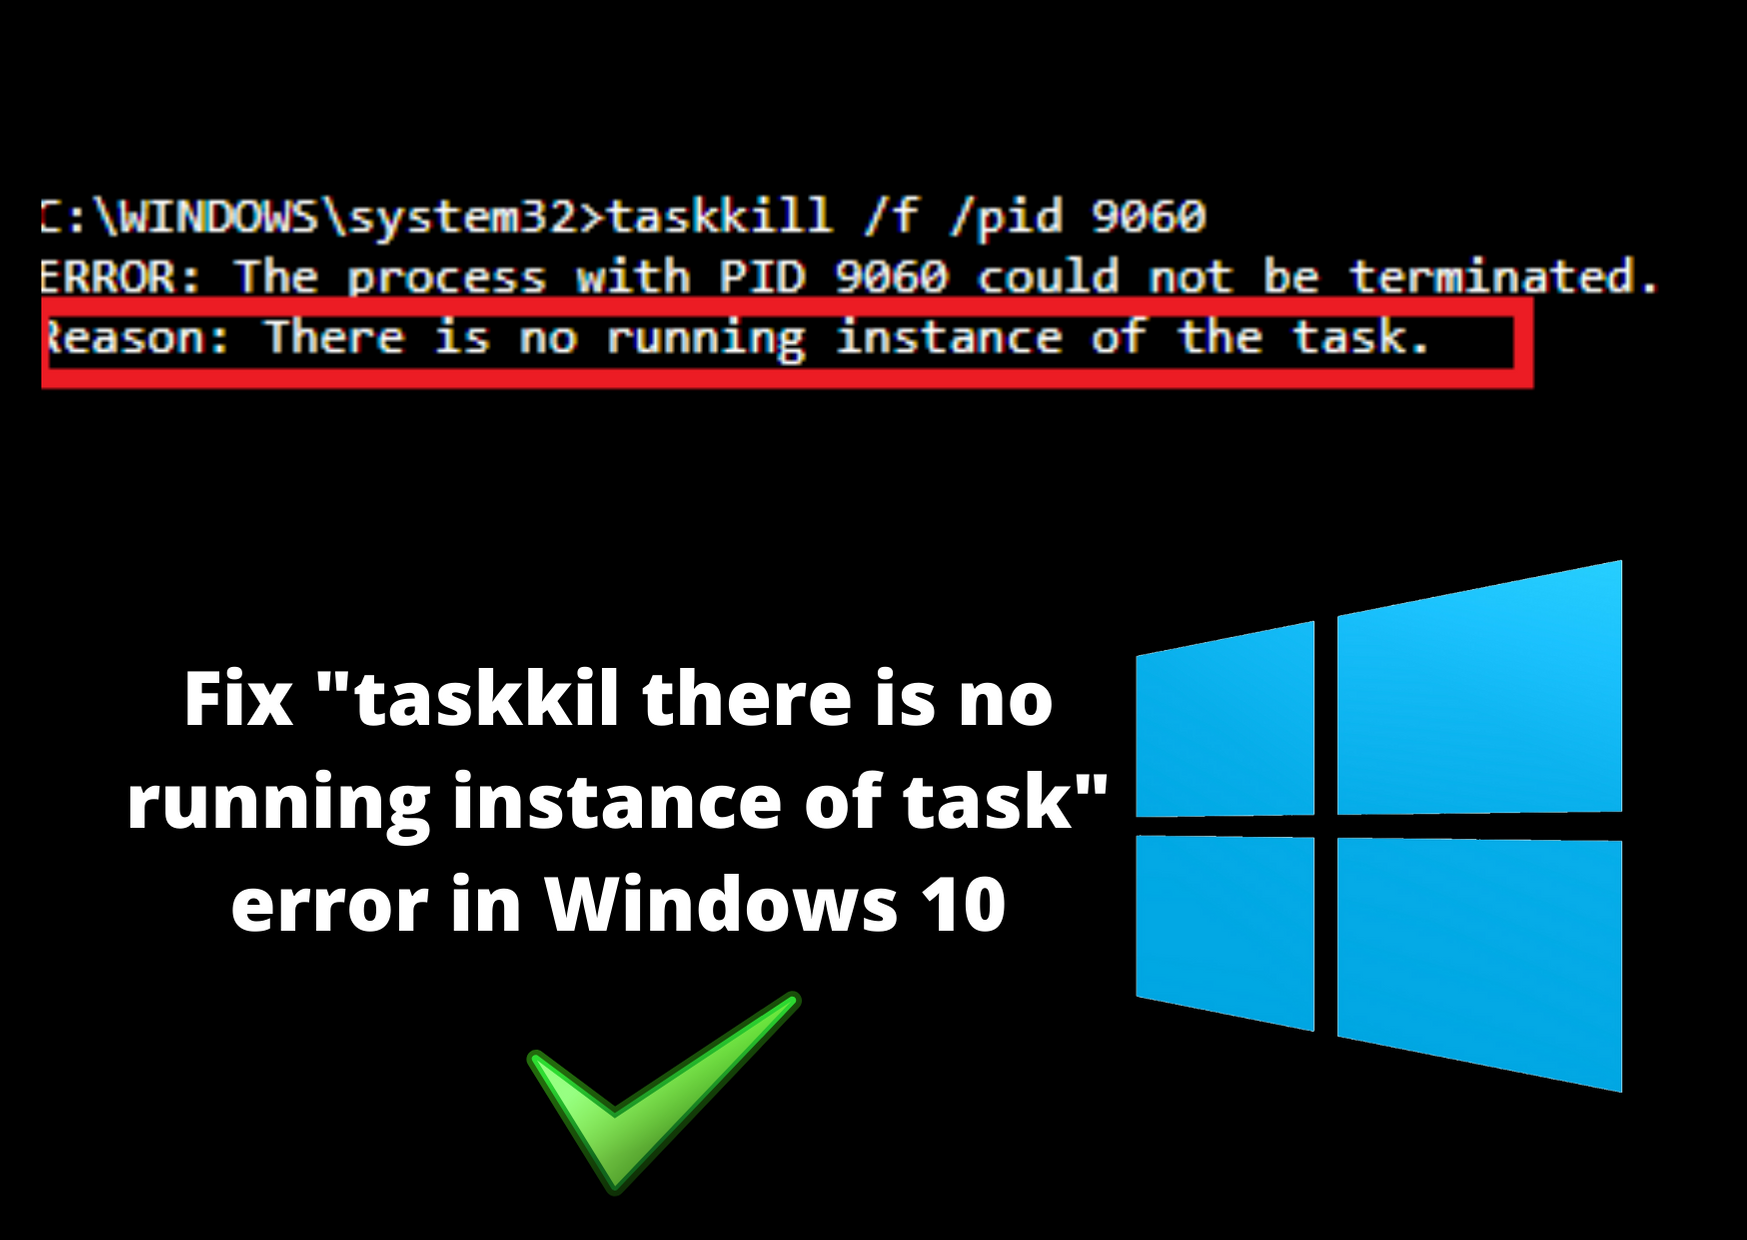 there is no running instance of task